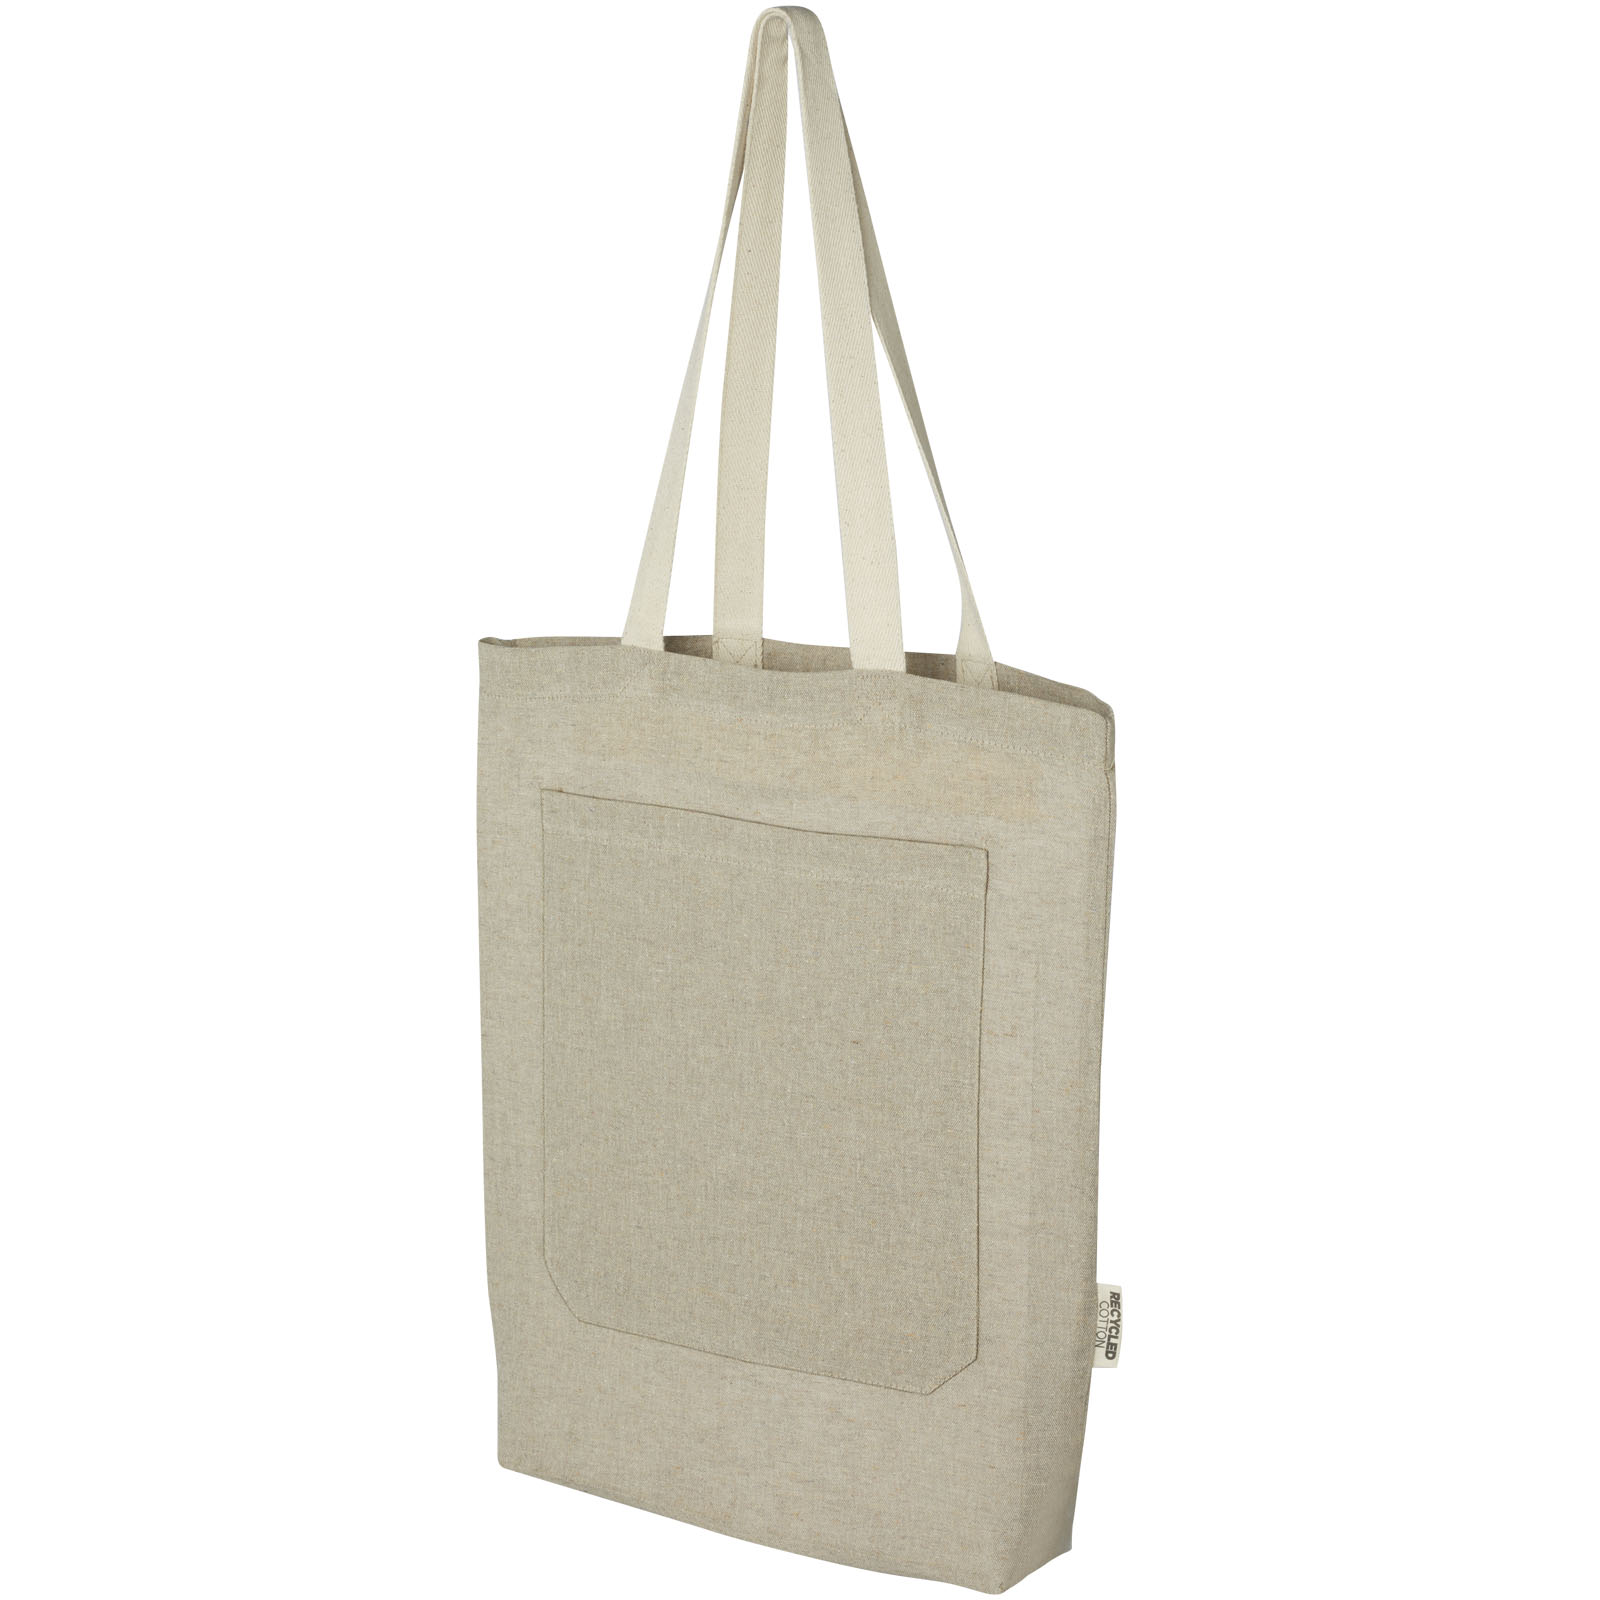 Shopping & Tote Bags - Pheebs 150 g/m² recycled cotton tote bag with front pocket 9L